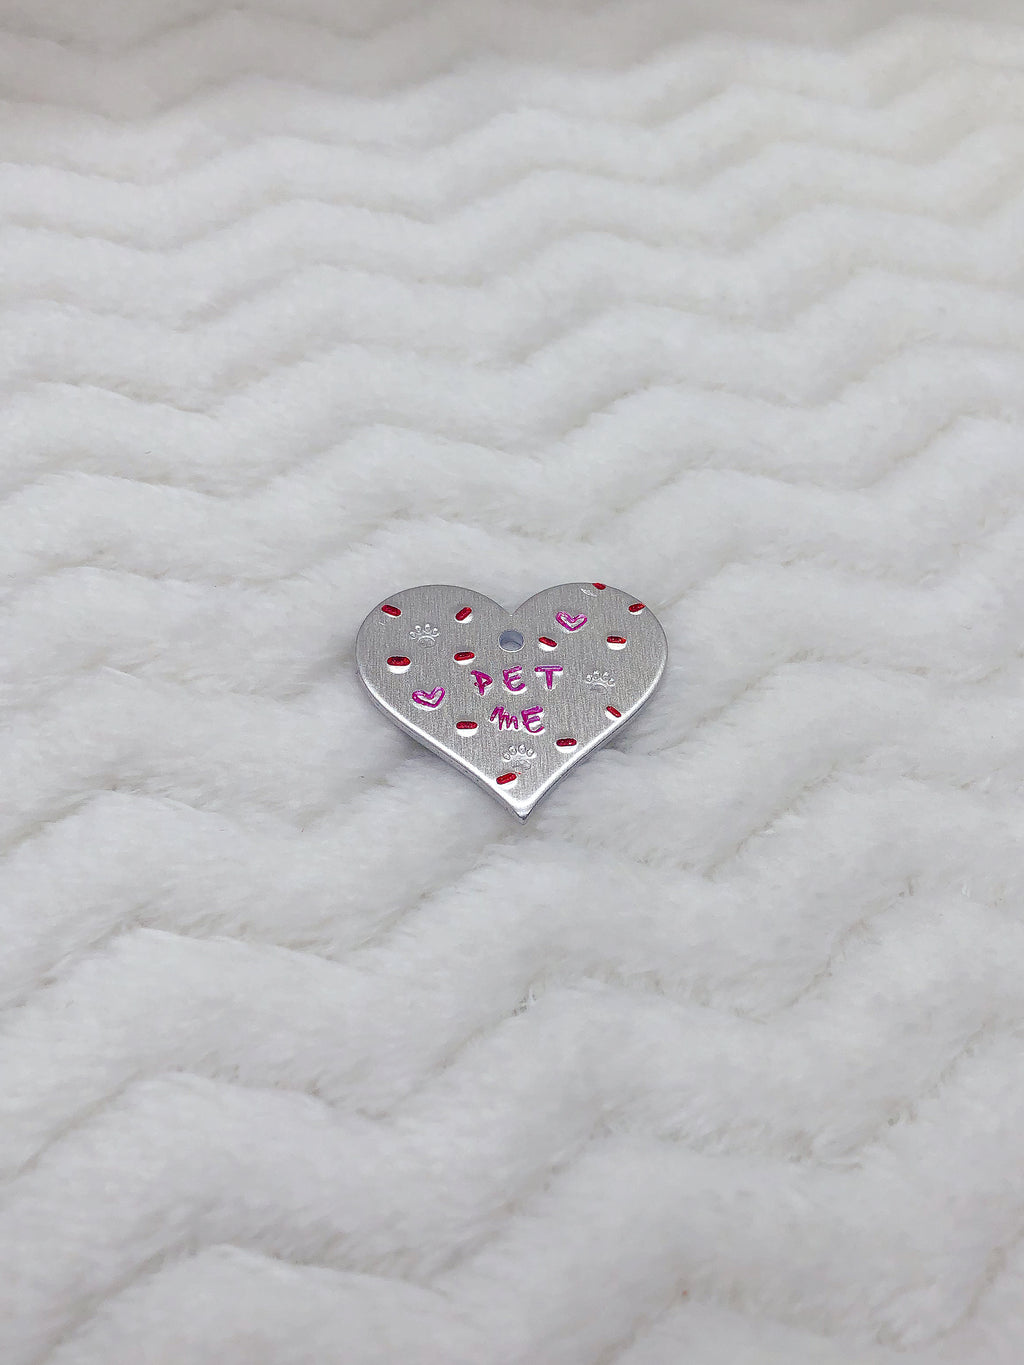 Customizable Sprinkle Stamped Pet Me Collar Tag or Bracelet/Paddle Charm